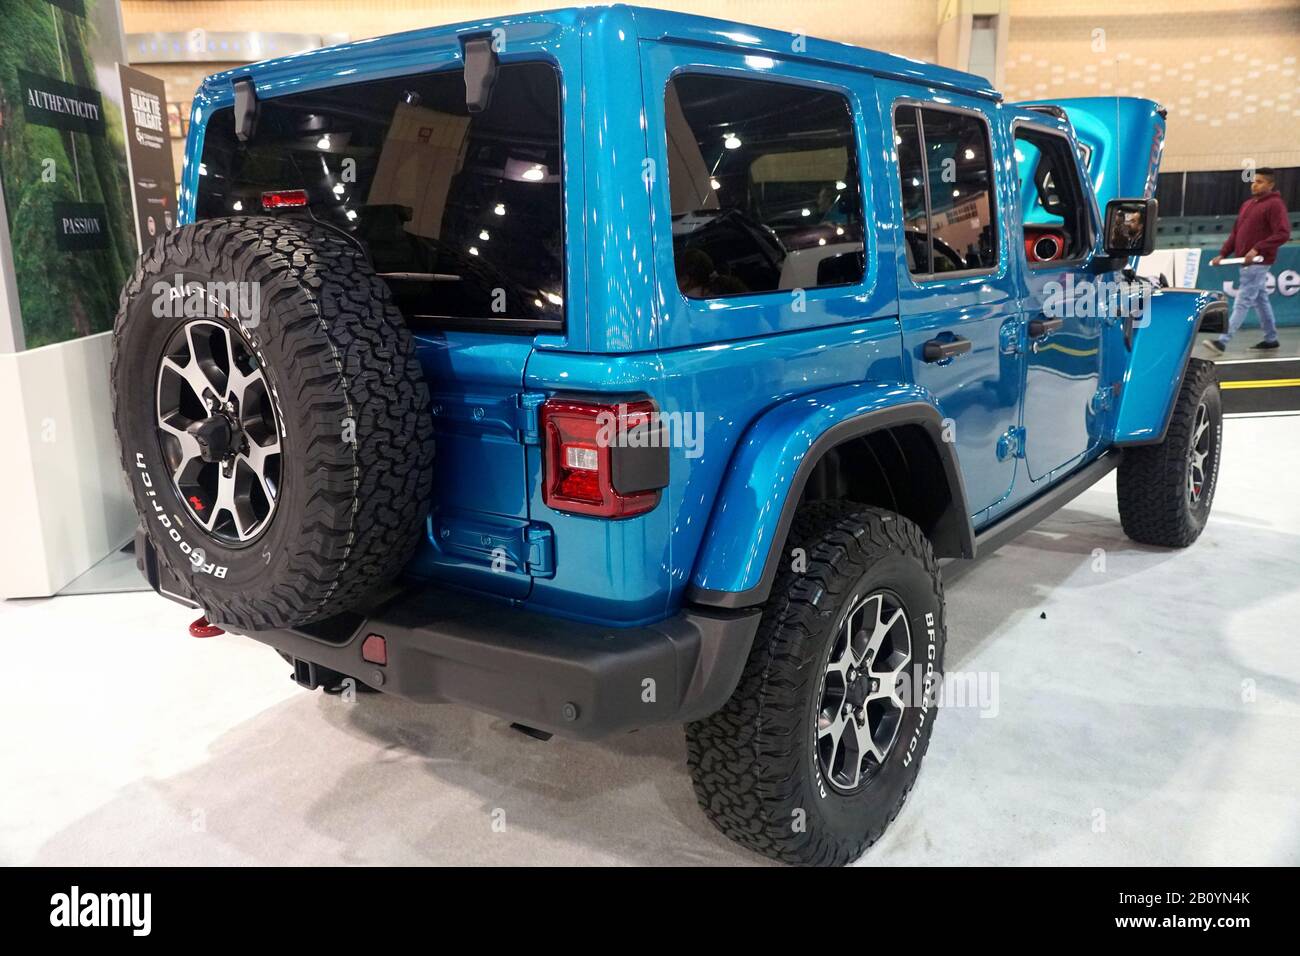 Philadelphia, Pennsylvania,  - February 9, 2020 - The side view of the  2020 Jeep Wrangler Unlimited Rubicon 4X4 blue color Stock Photo - Alamy